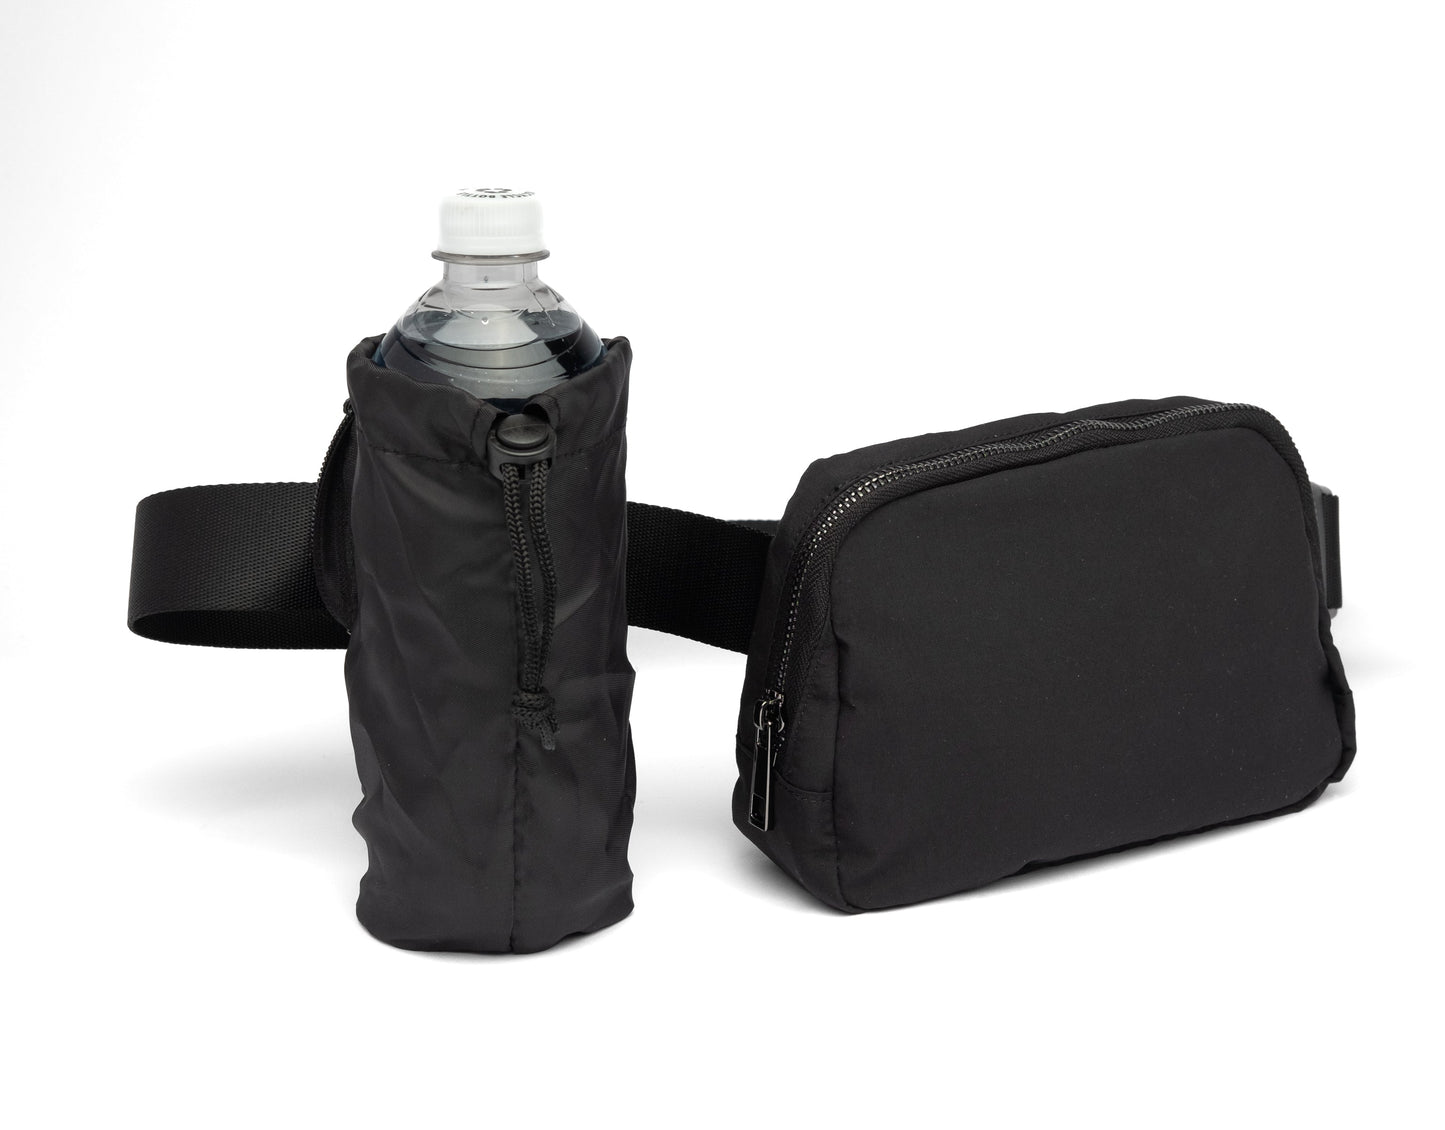 HydroHolster Only- Black Beltbag Accessory